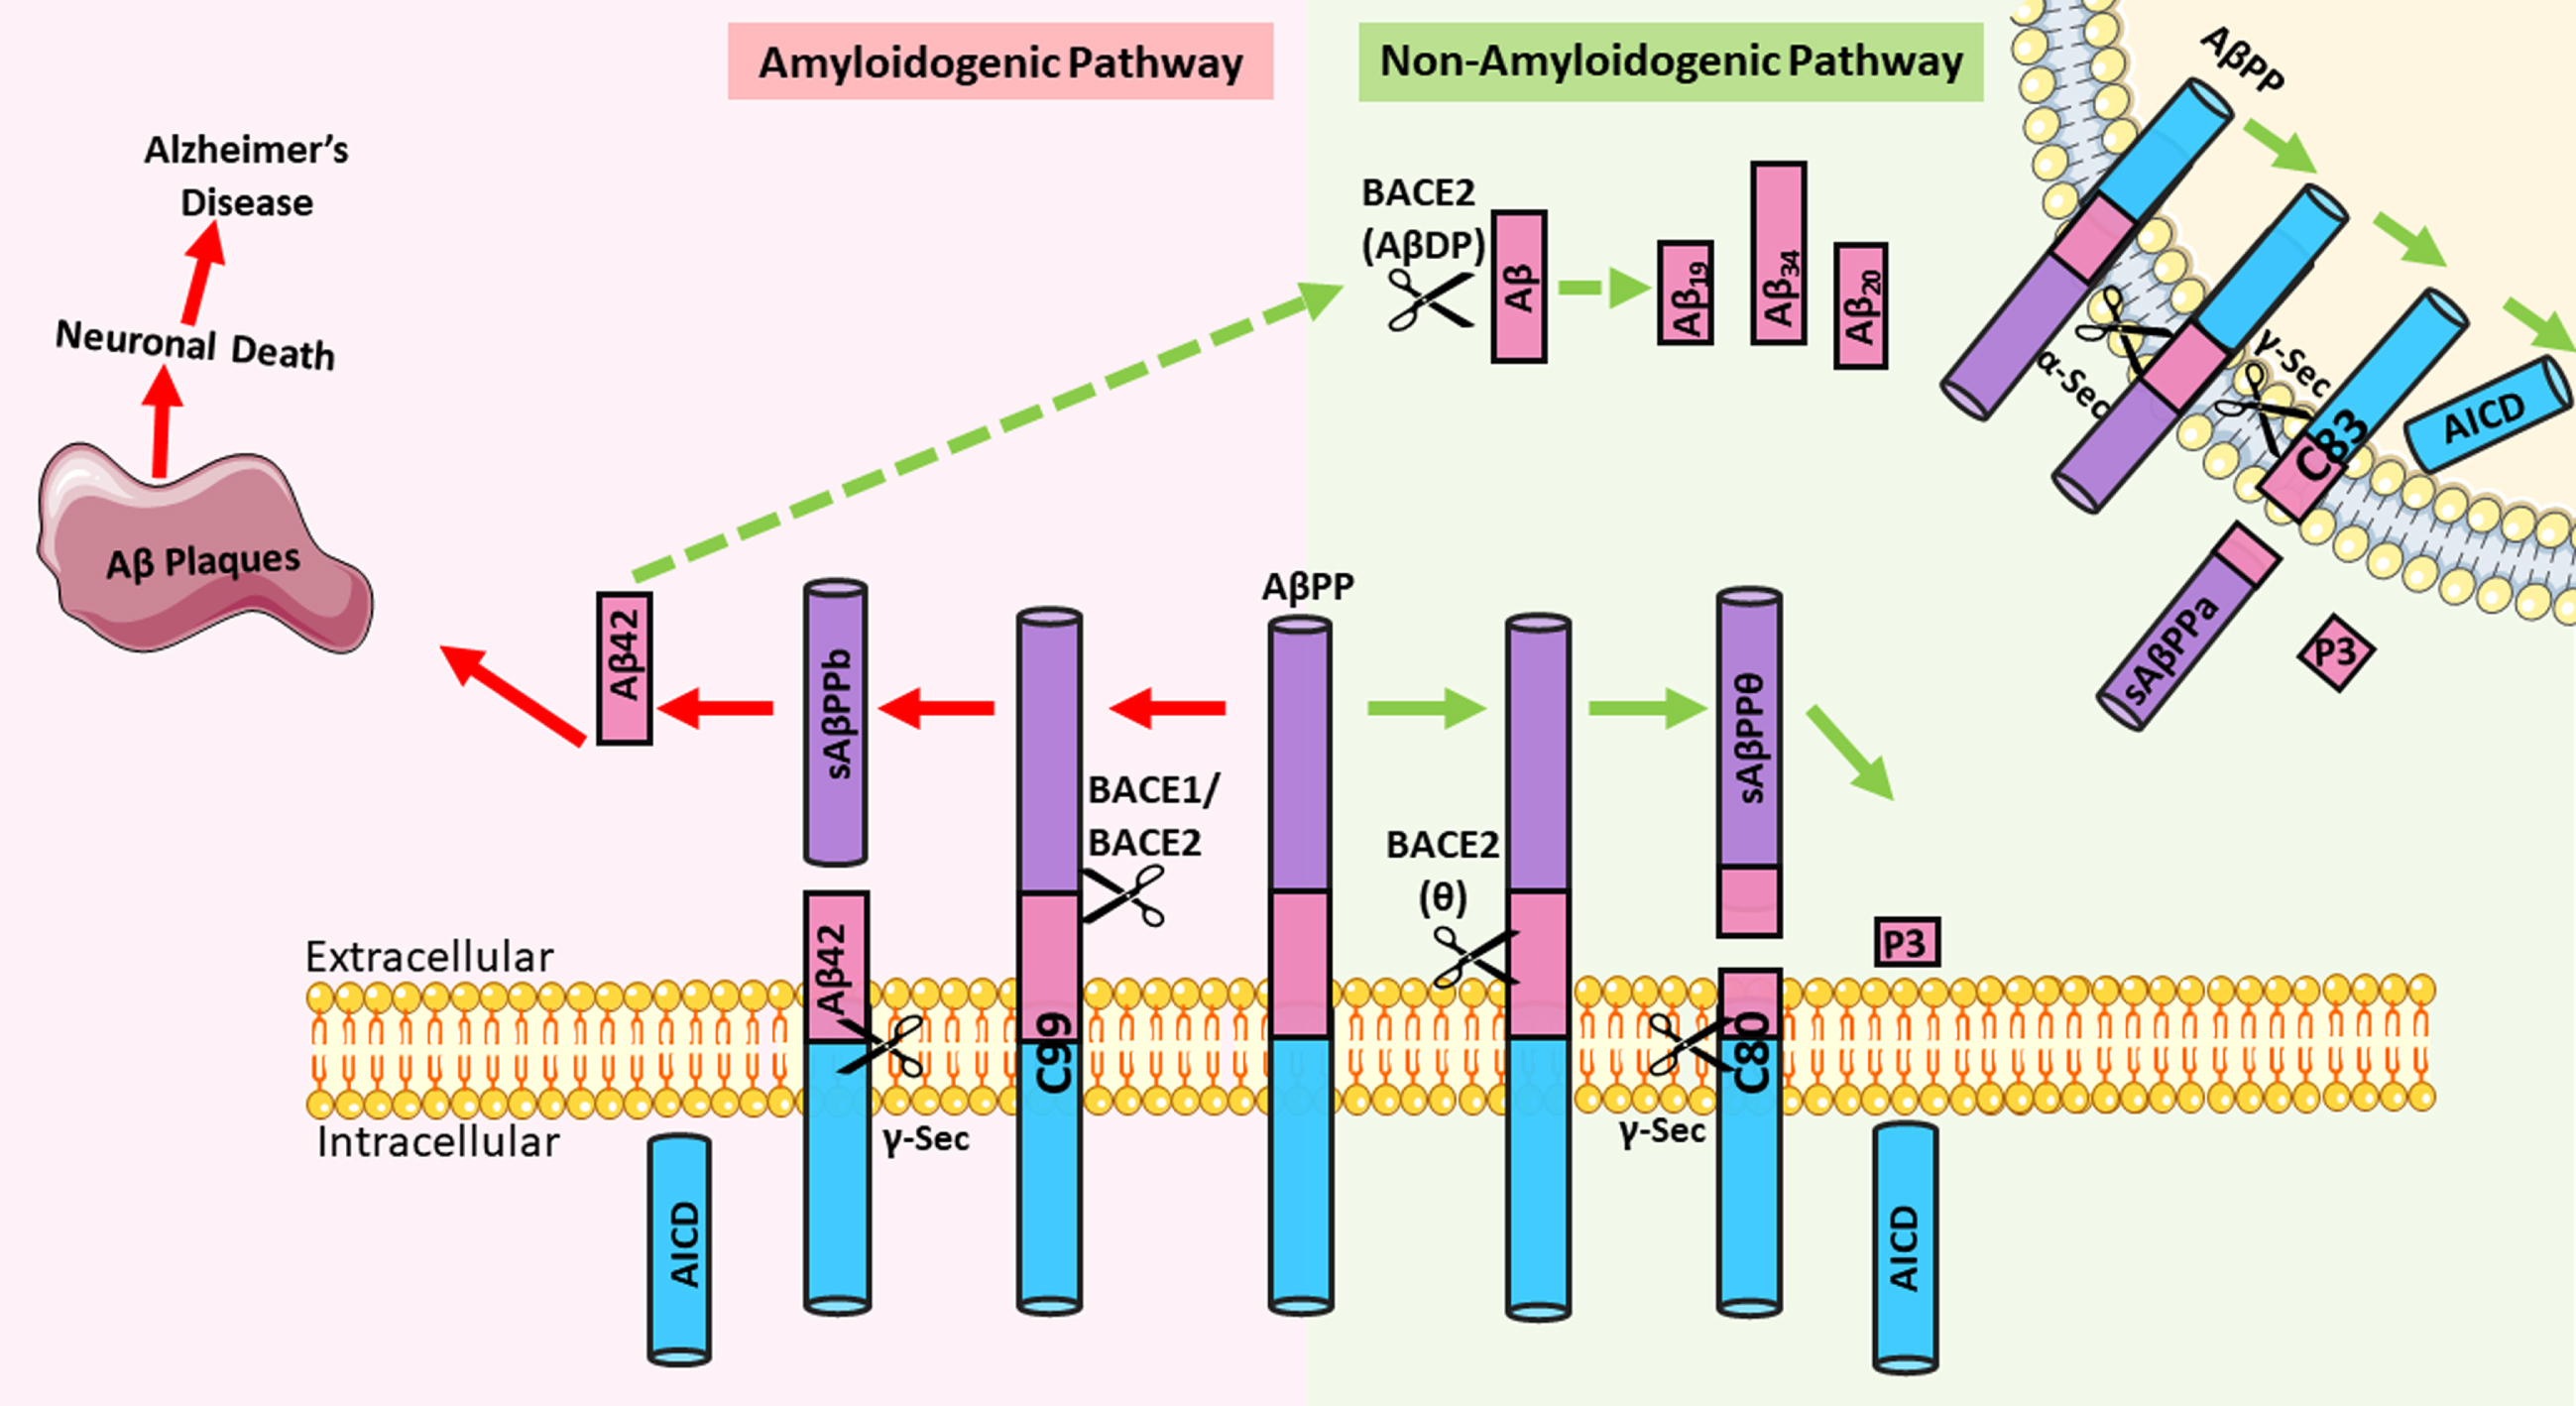 Processing of amyloid-β protein precursor (AβPP) via the amyloidogenic or non-amyloidogenic pathway. In the amyloidogenic pathway, AβPP undergoes sequential cleavage first by BACE1 or BACE2 to generate a C99 fragment, which is then cleaved by γ-secretase to release Aβ42. This Aβ42 is aggregate prone and can form neurotoxic plaques that are implicated in the amyloid cascade hypothesis to cause Alzheimer’s disease. In the non-amyloidogenic pathway, Aβ42 can undergo further degradation by BACE2, which can also function as an Aβ-degrading protease (AβDP). The degradation products include non-toxic Aβ species Aβ19, Aβ20, and Aβ34. In addition, AβPP can be either cleaved by BACE2 at the θ-site, or by α-secretase to generate a C80 or C83 fragment, respectively. These C-terminal fragments undergo further cleavage by γ-secretase to release the AβPP intracellular domain (AICD) and a short fragment P3. In this case, no Aβ42 is generated. [Parts of the figure were drawn by using pictures from Servier Medical Art. Servier Medical Art by Servier is licensed under a Creative Commons Attribution 3.0 Unported License (https://creativecommons.org/licenses/by/3.0/)].